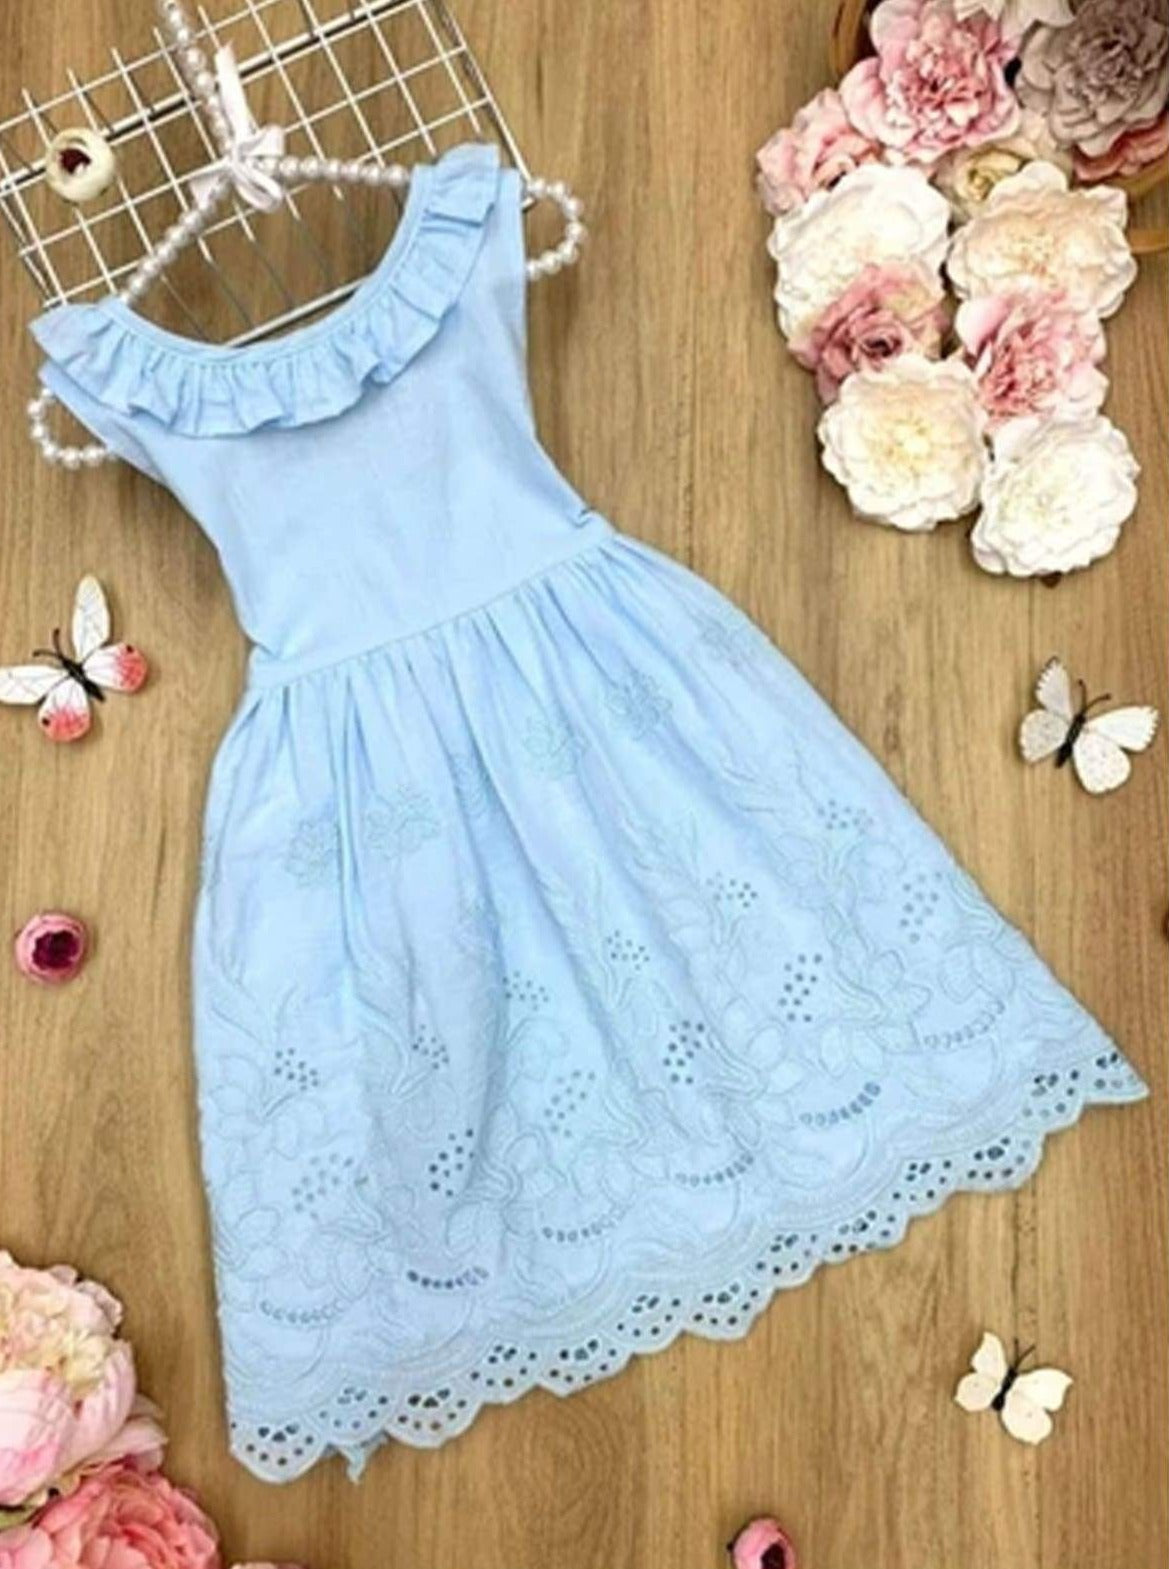 Little Girls Summer Sleeveless summer dress ruffle bib, scoop back design, embroidered lace skirt with detailed hem, and bow tie at the back - Mia Belle Girls